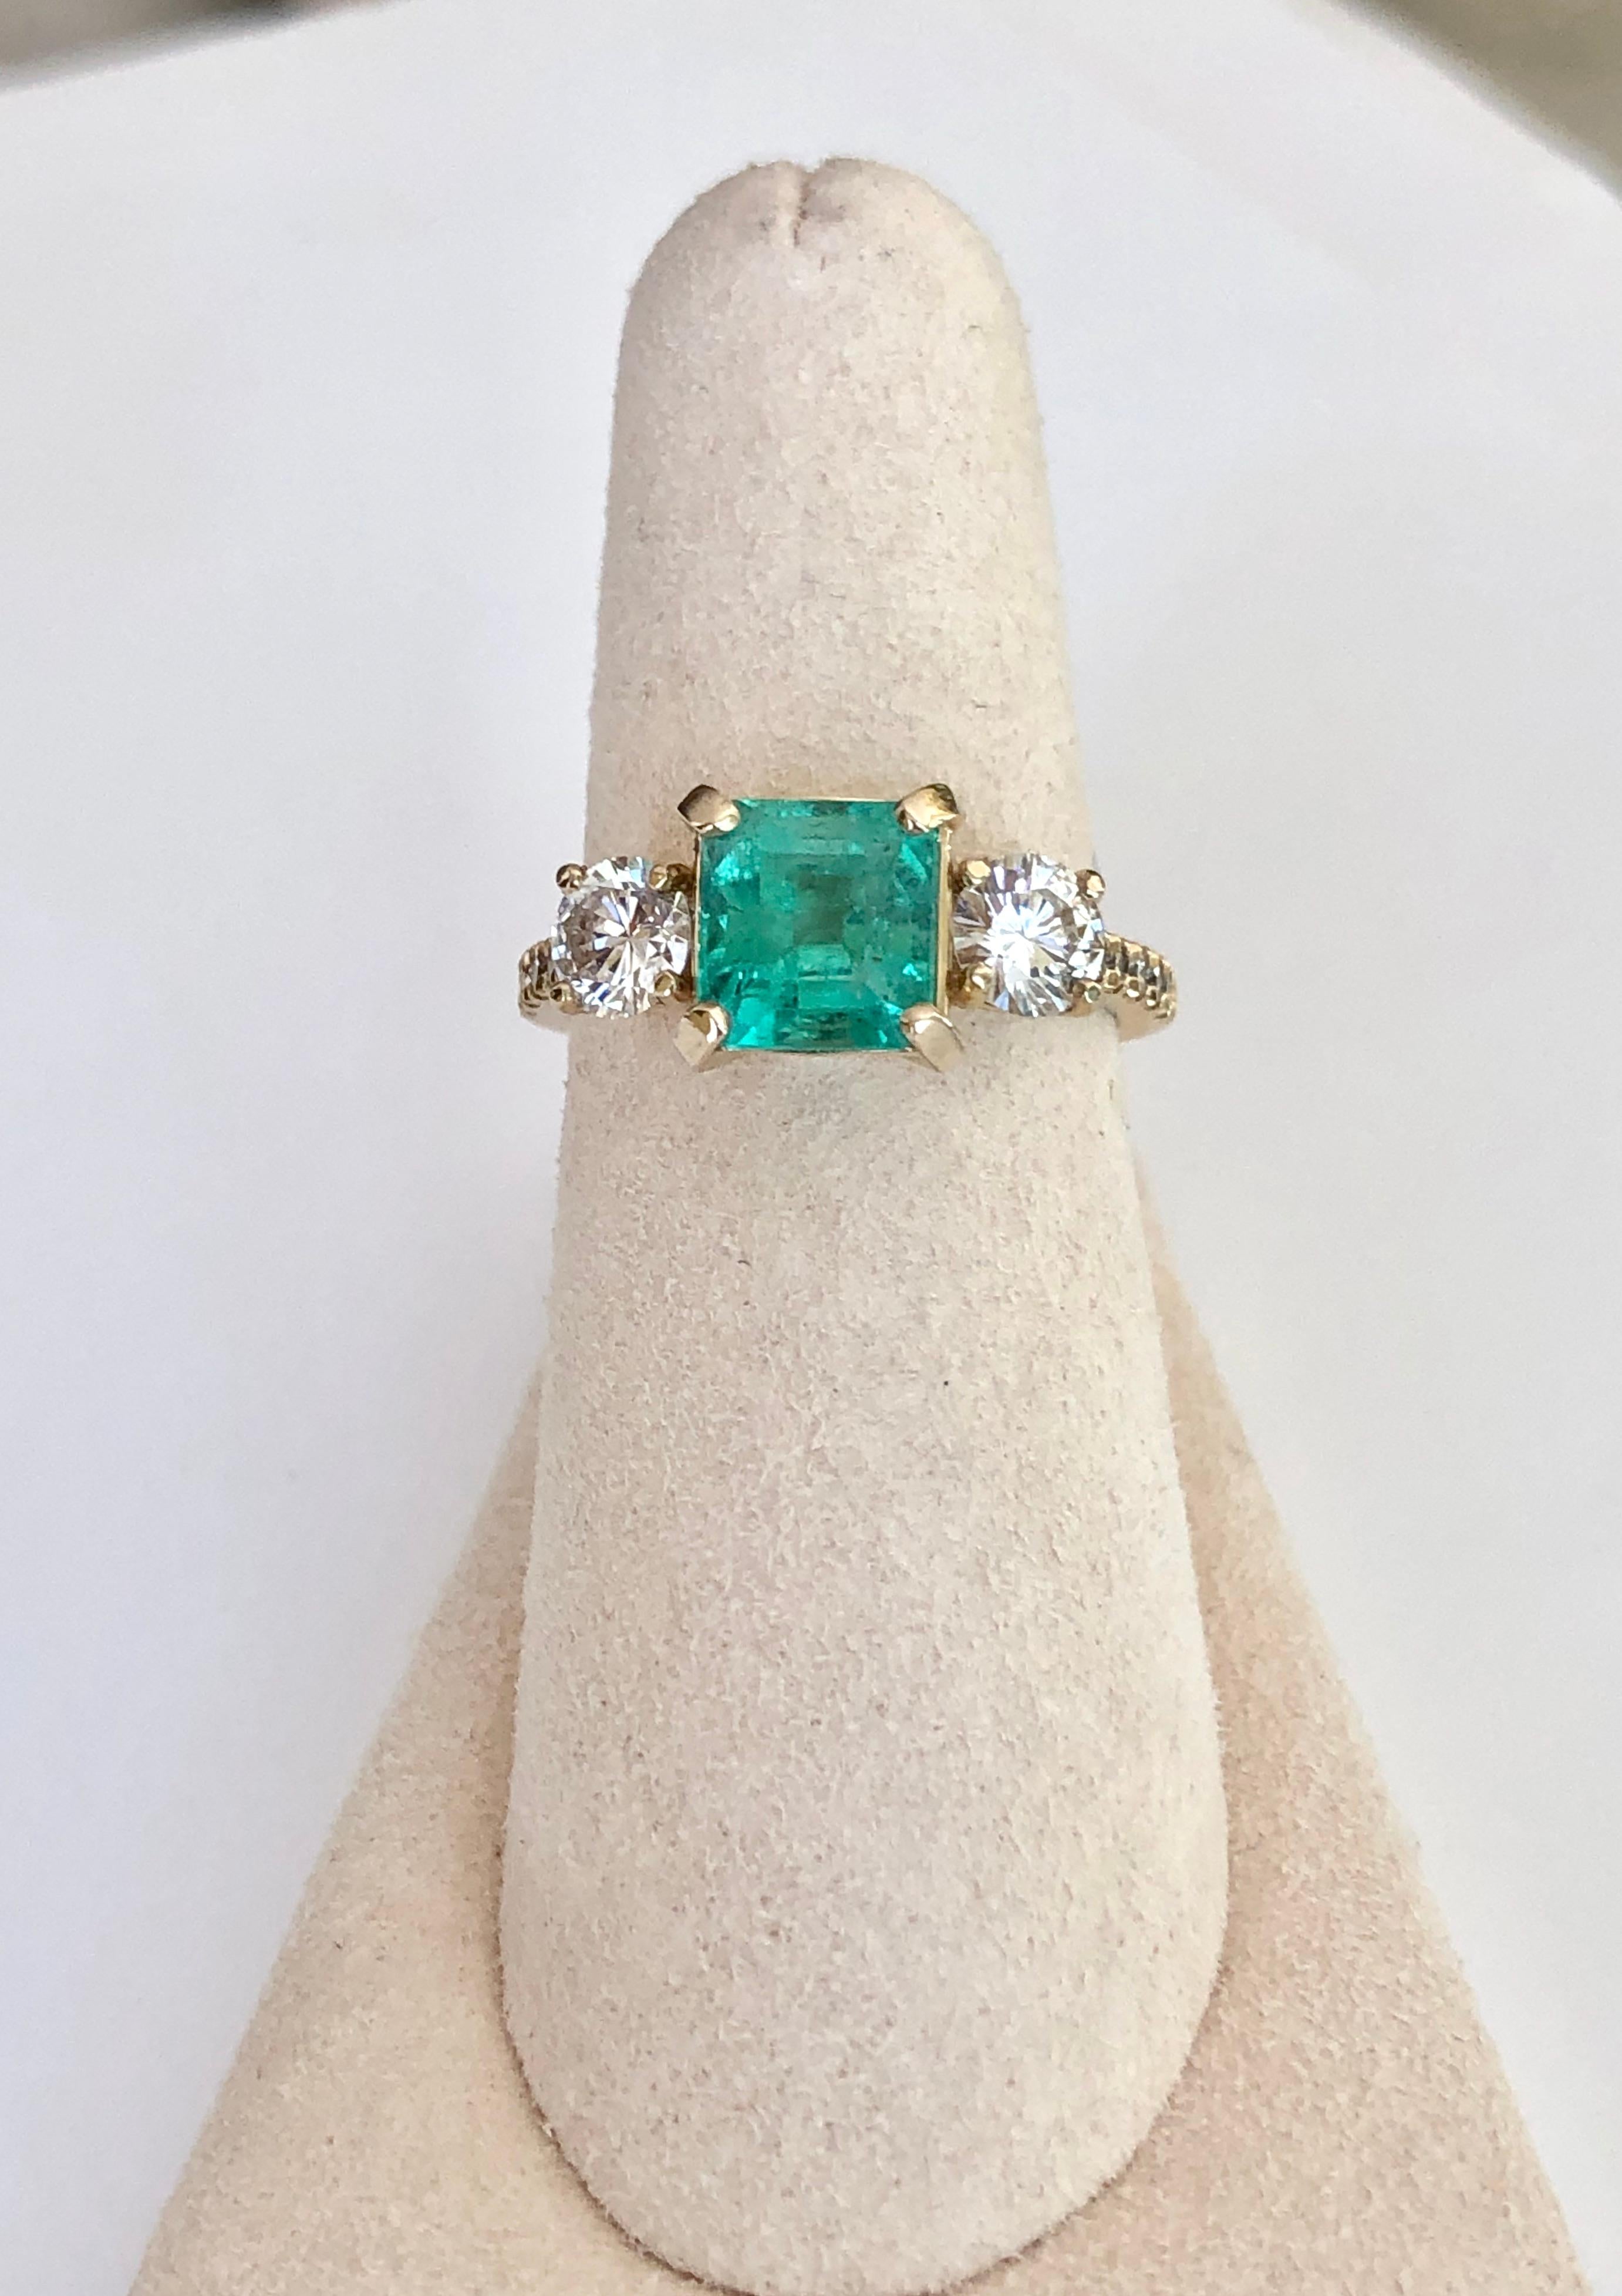 natural colombian emerald rings